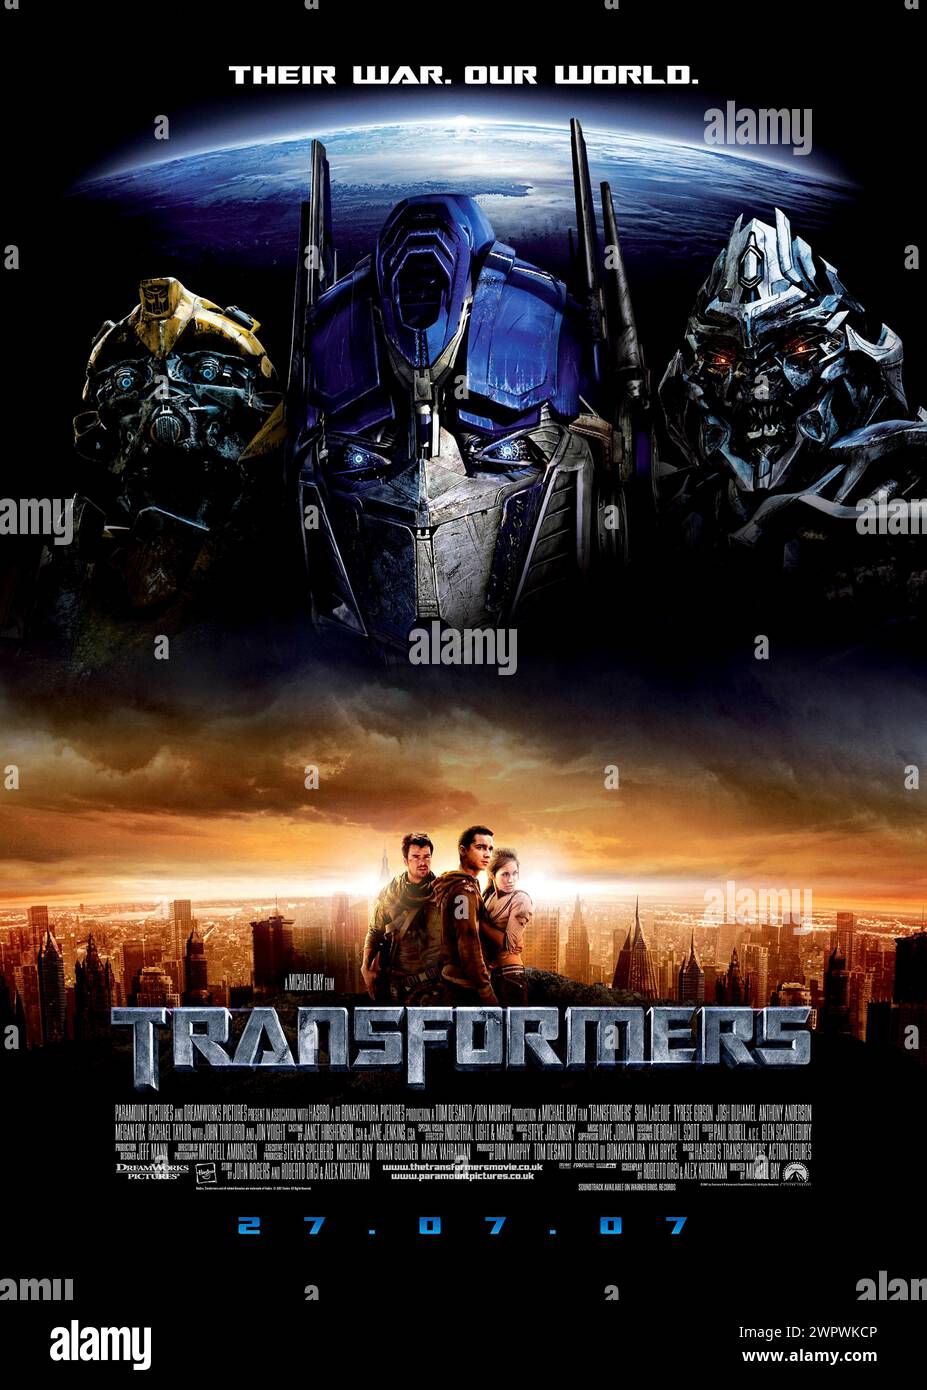 Transformers (2007) directed by Michael Bay and starring Shia LaBeouf, Megan Fox and Josh Duhamel. An ancient struggle between two Cybertronian races, the heroic Autobots and the evil Decepticons, comes to Earth, with a clue to the ultimate power held by a teenager. US one sheet poster. ***EDITORIAL USE ONLY*** Credit: BFA / Paramount Pictures Stock Photo